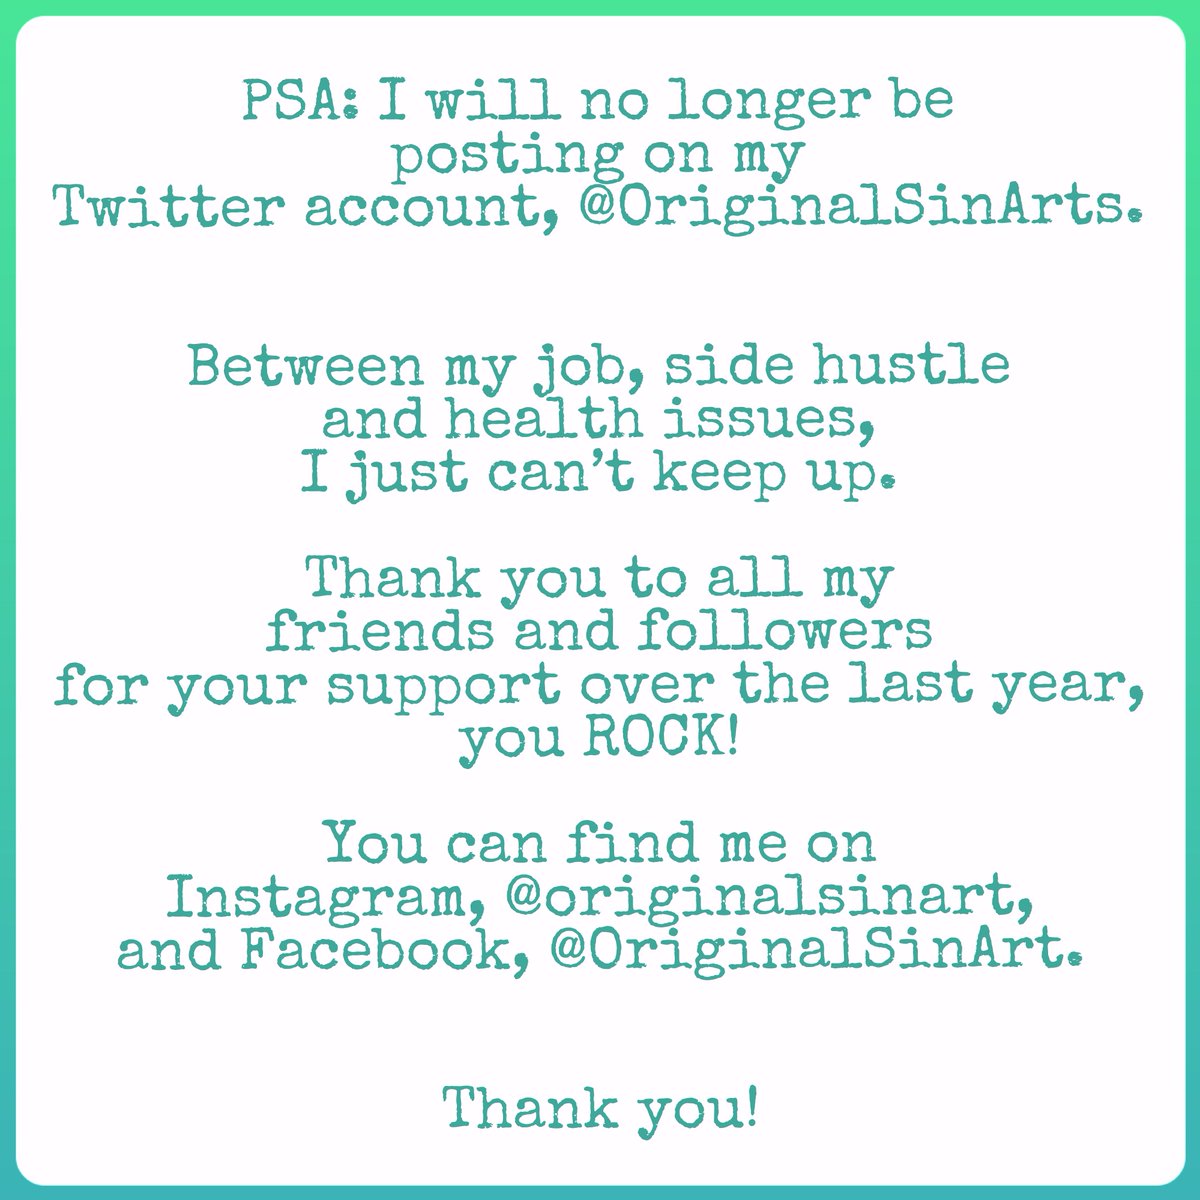 After a lot of soul searching, I have decided to stop using Twitter.  Thank you to everyone for the love and support you've shown me over the last year. I hope to see you on Instagram and Facebook instead!
*
 #originalsinart #originalsinarts #ciao #solongandthanksforallthefish